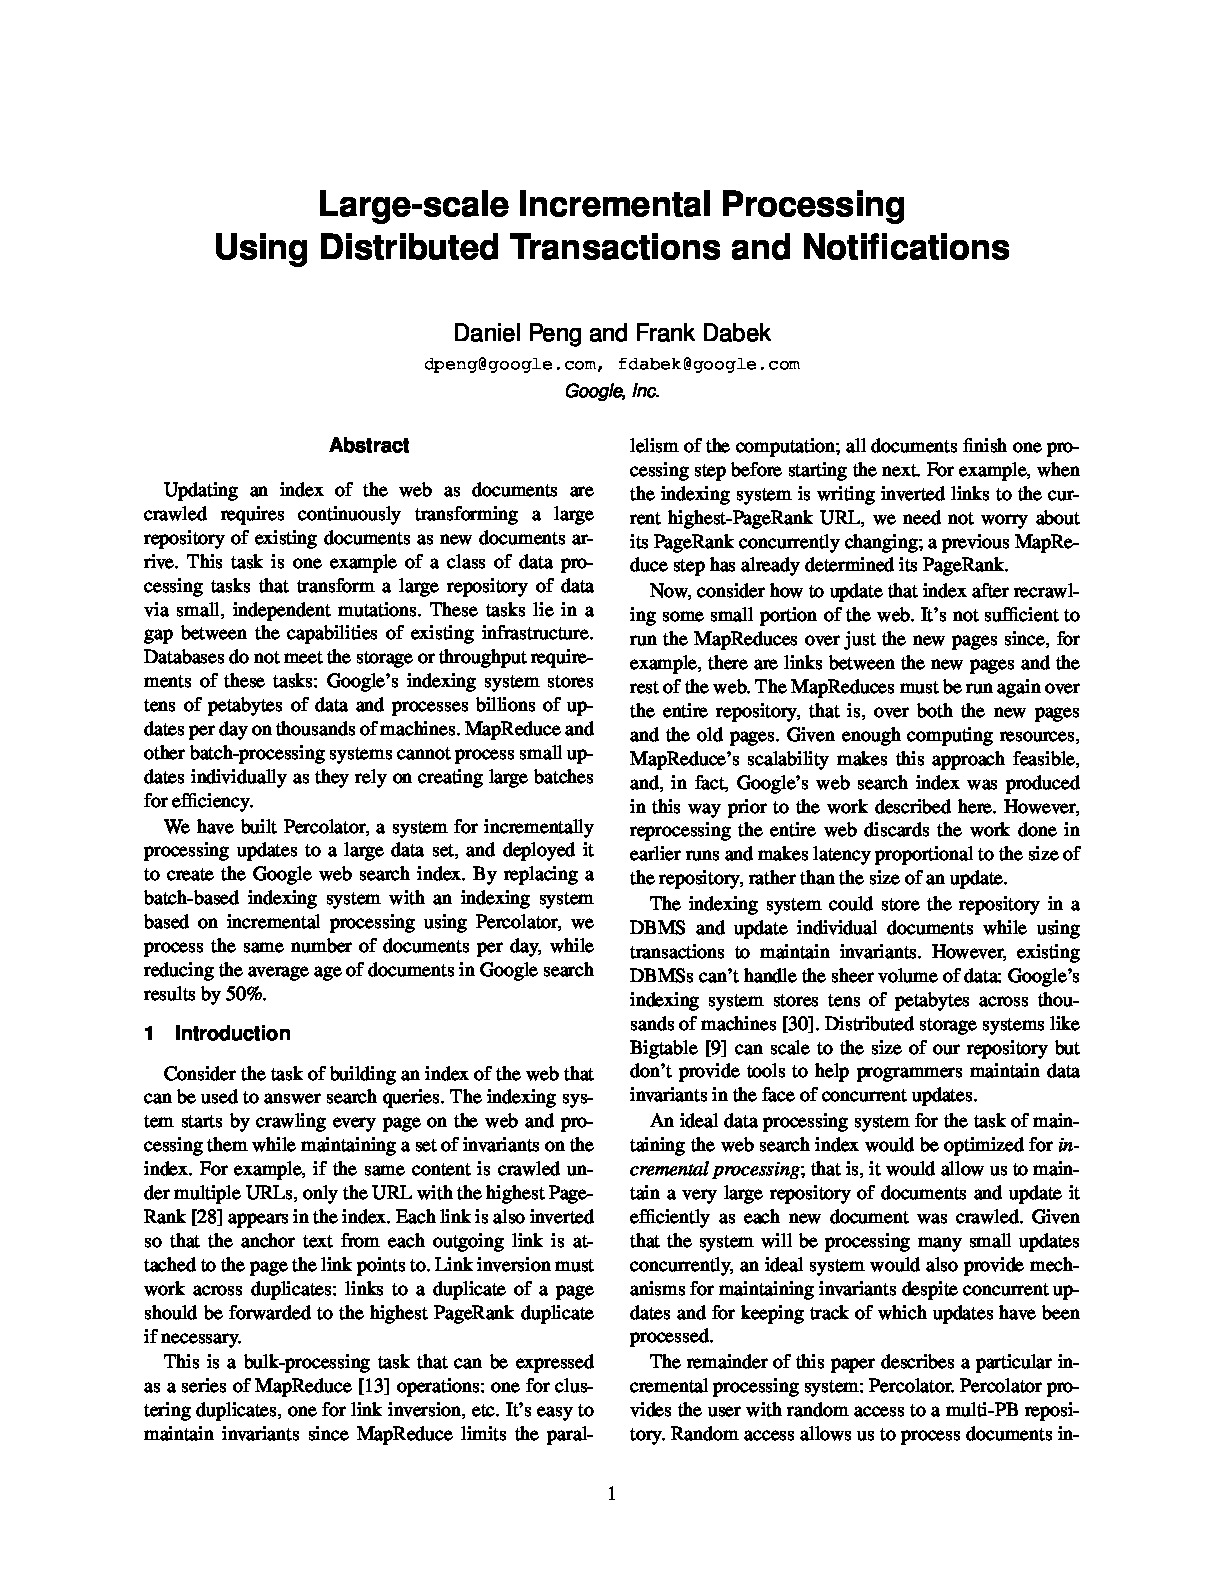 distributed-transactions